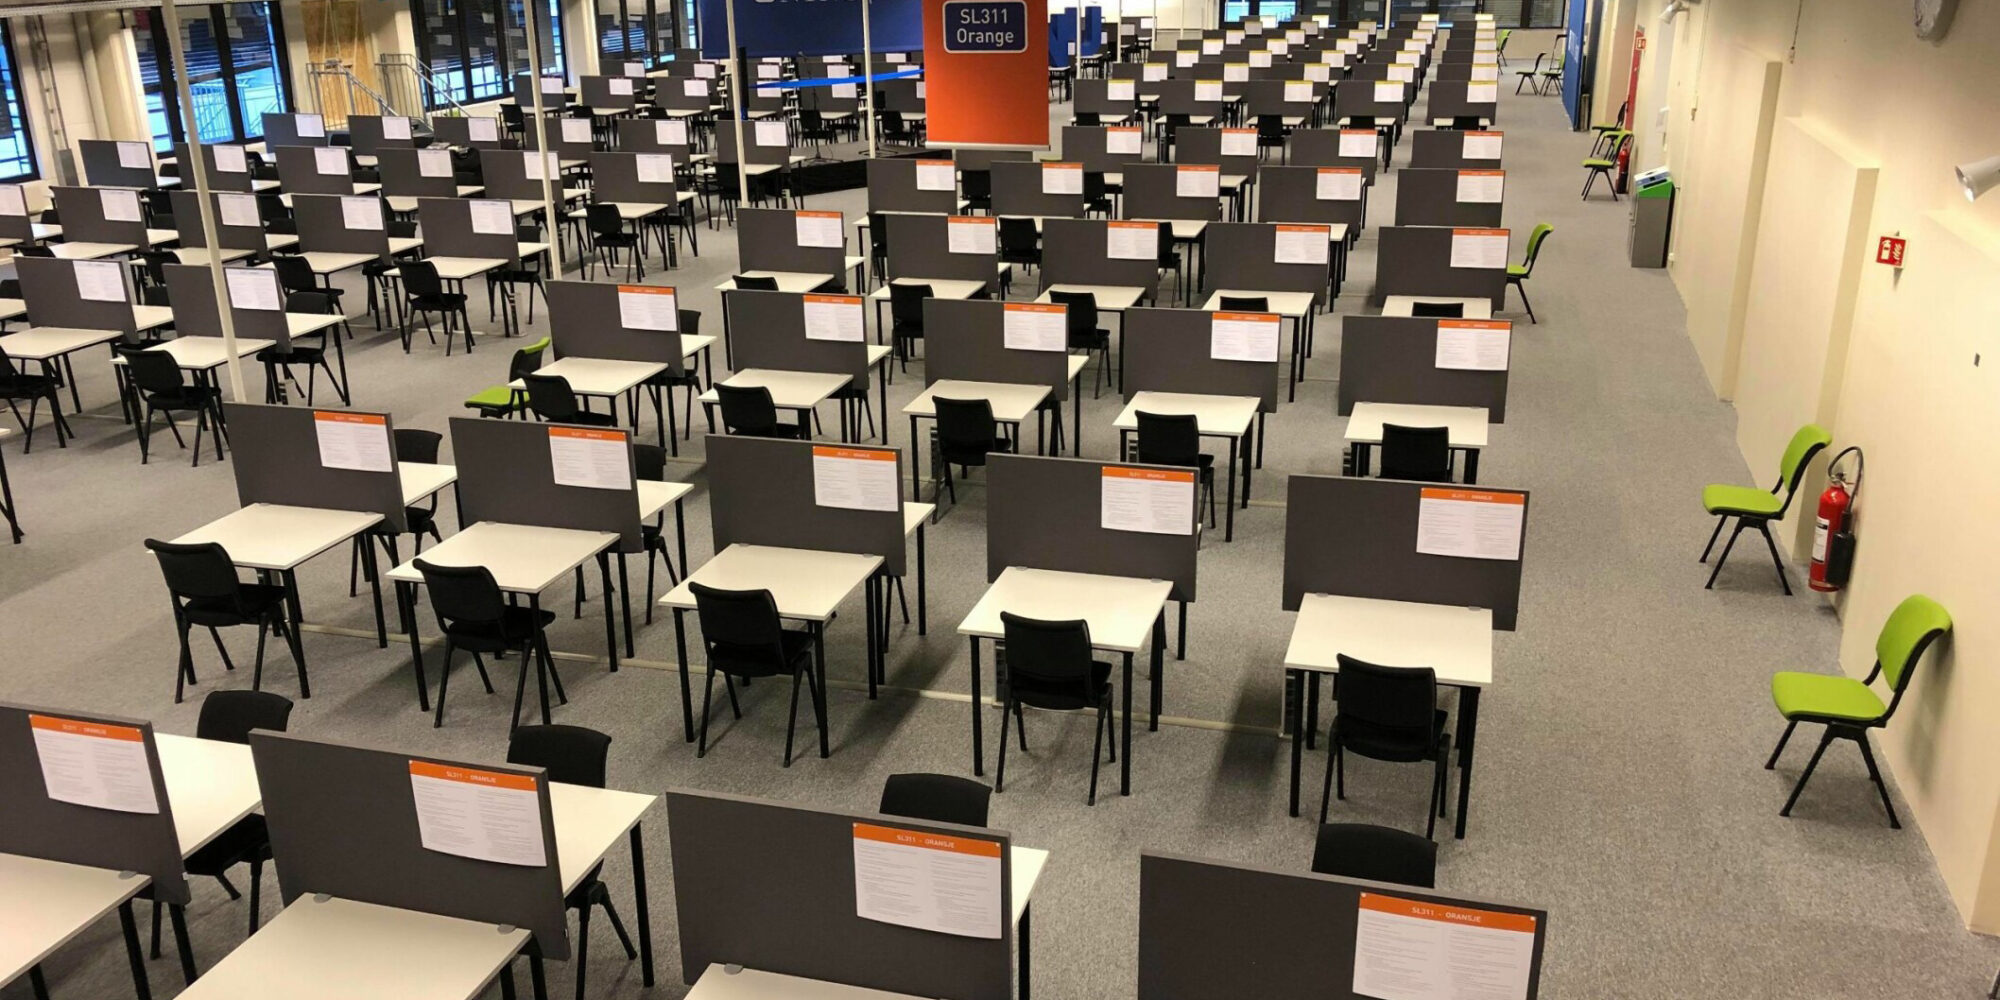 Empty tables in a room used for exams